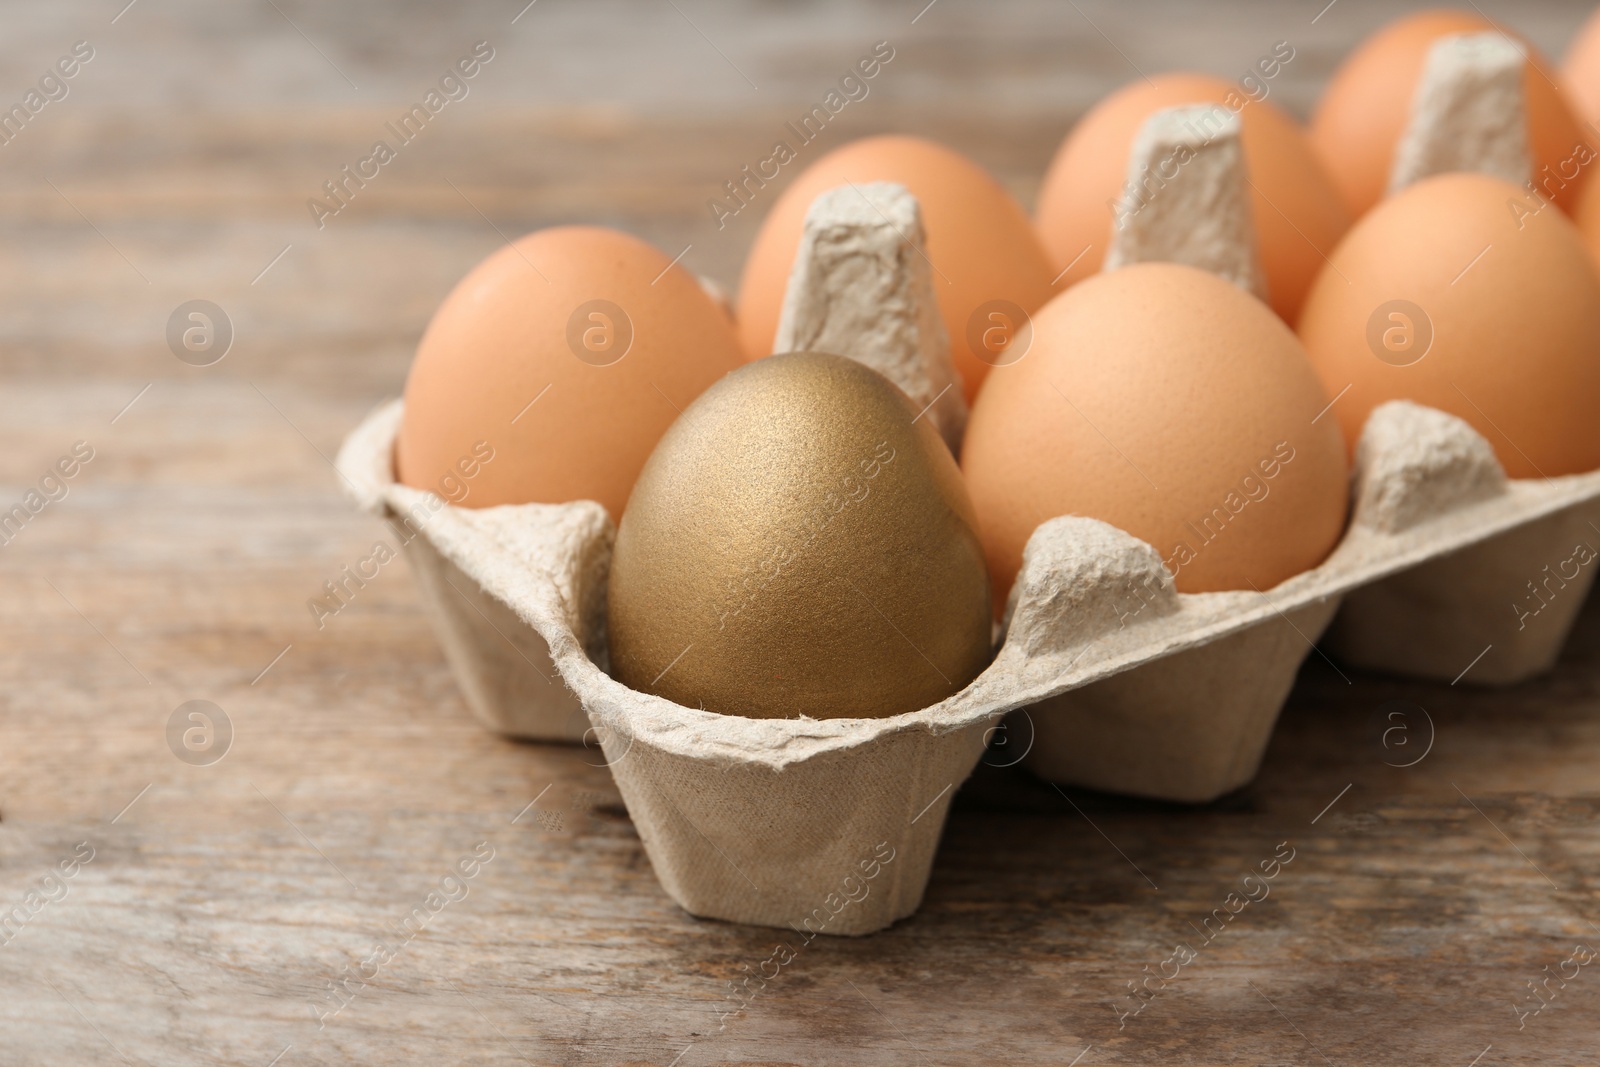 Photo of Golden egg among others in carton on wooden background